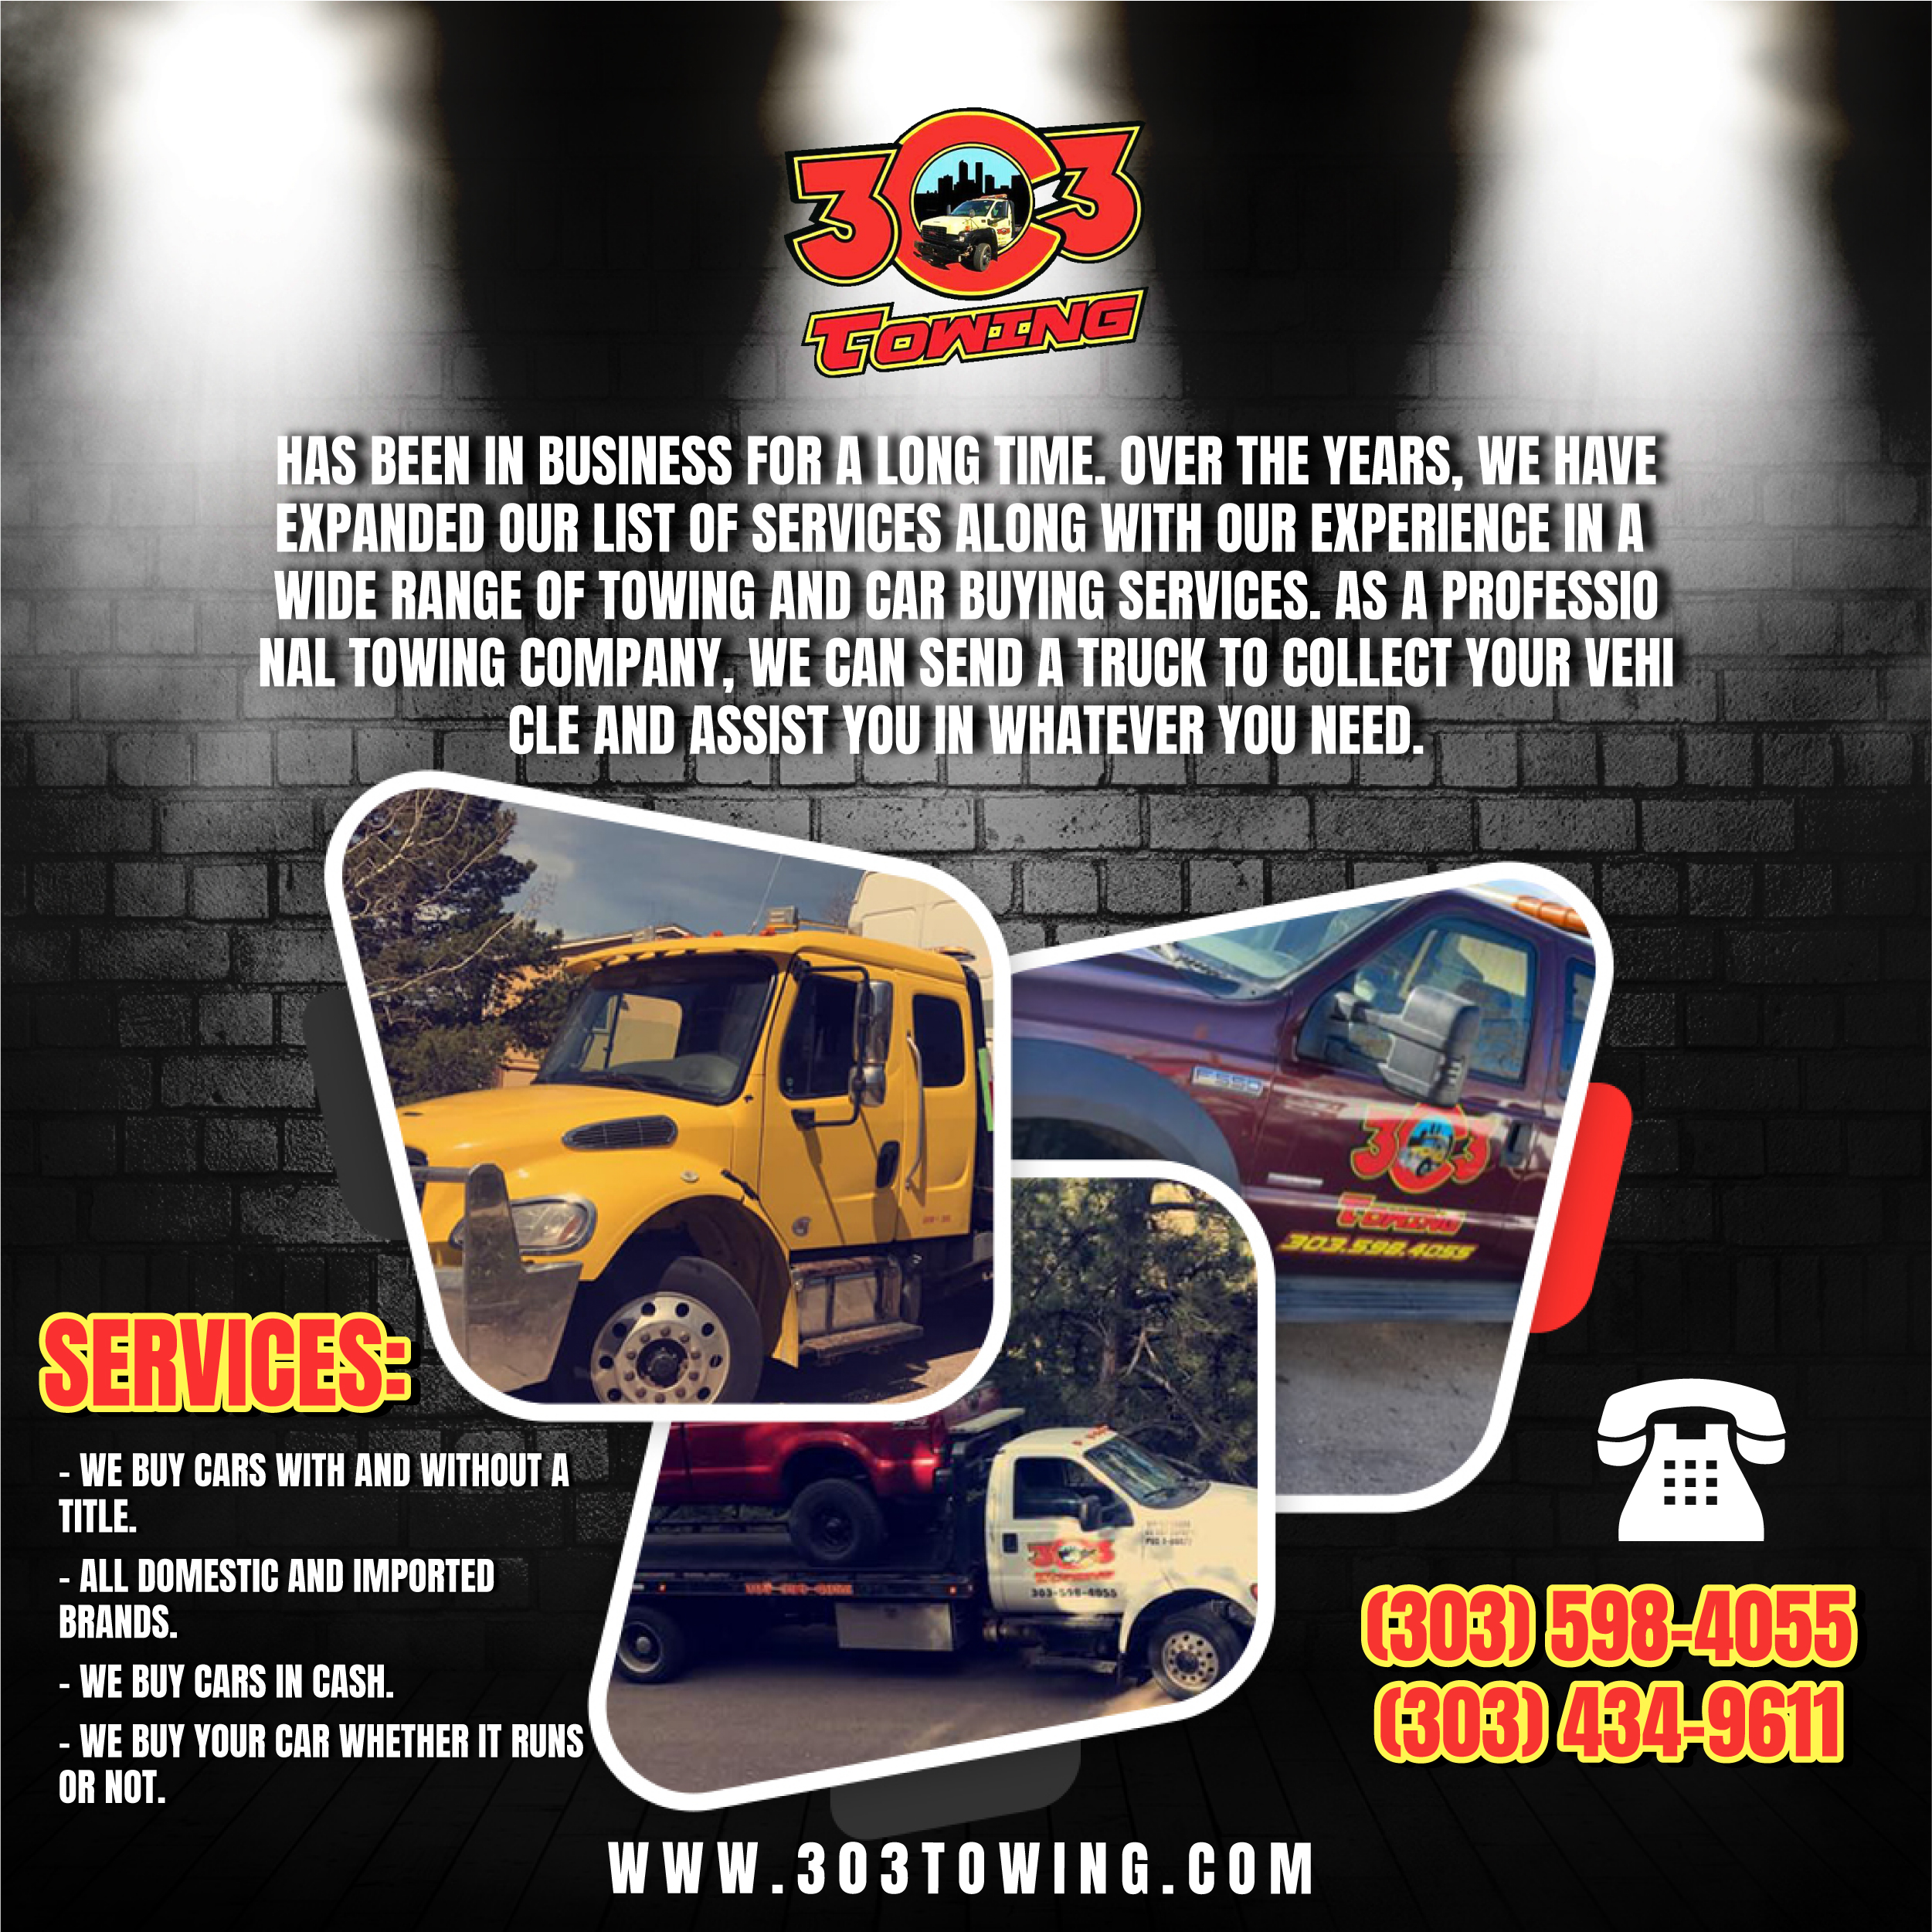 Towing-Service-in-Commerce-City-CO-Towing-Service-in-Denver-CO-We-Buy-Junk-Cars-in-Denver-CO-2